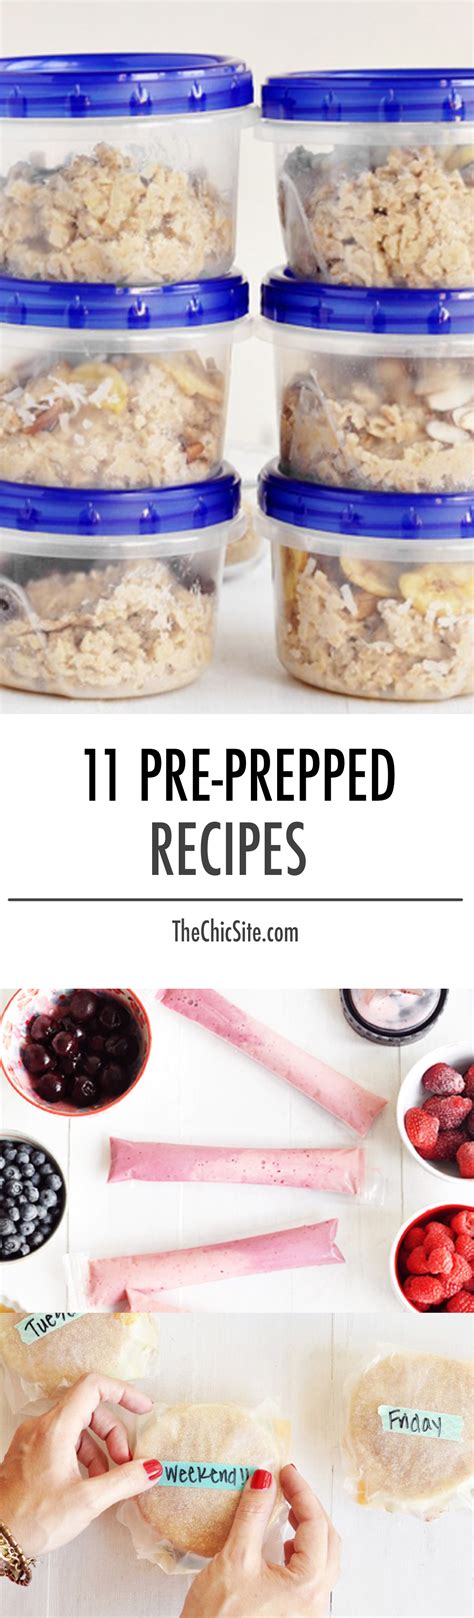 One of the goals is to save time by getting things ready ahead of time. 11 Pre-Prepped Recipes - Rachel Hollis | Recipes, Food and ...